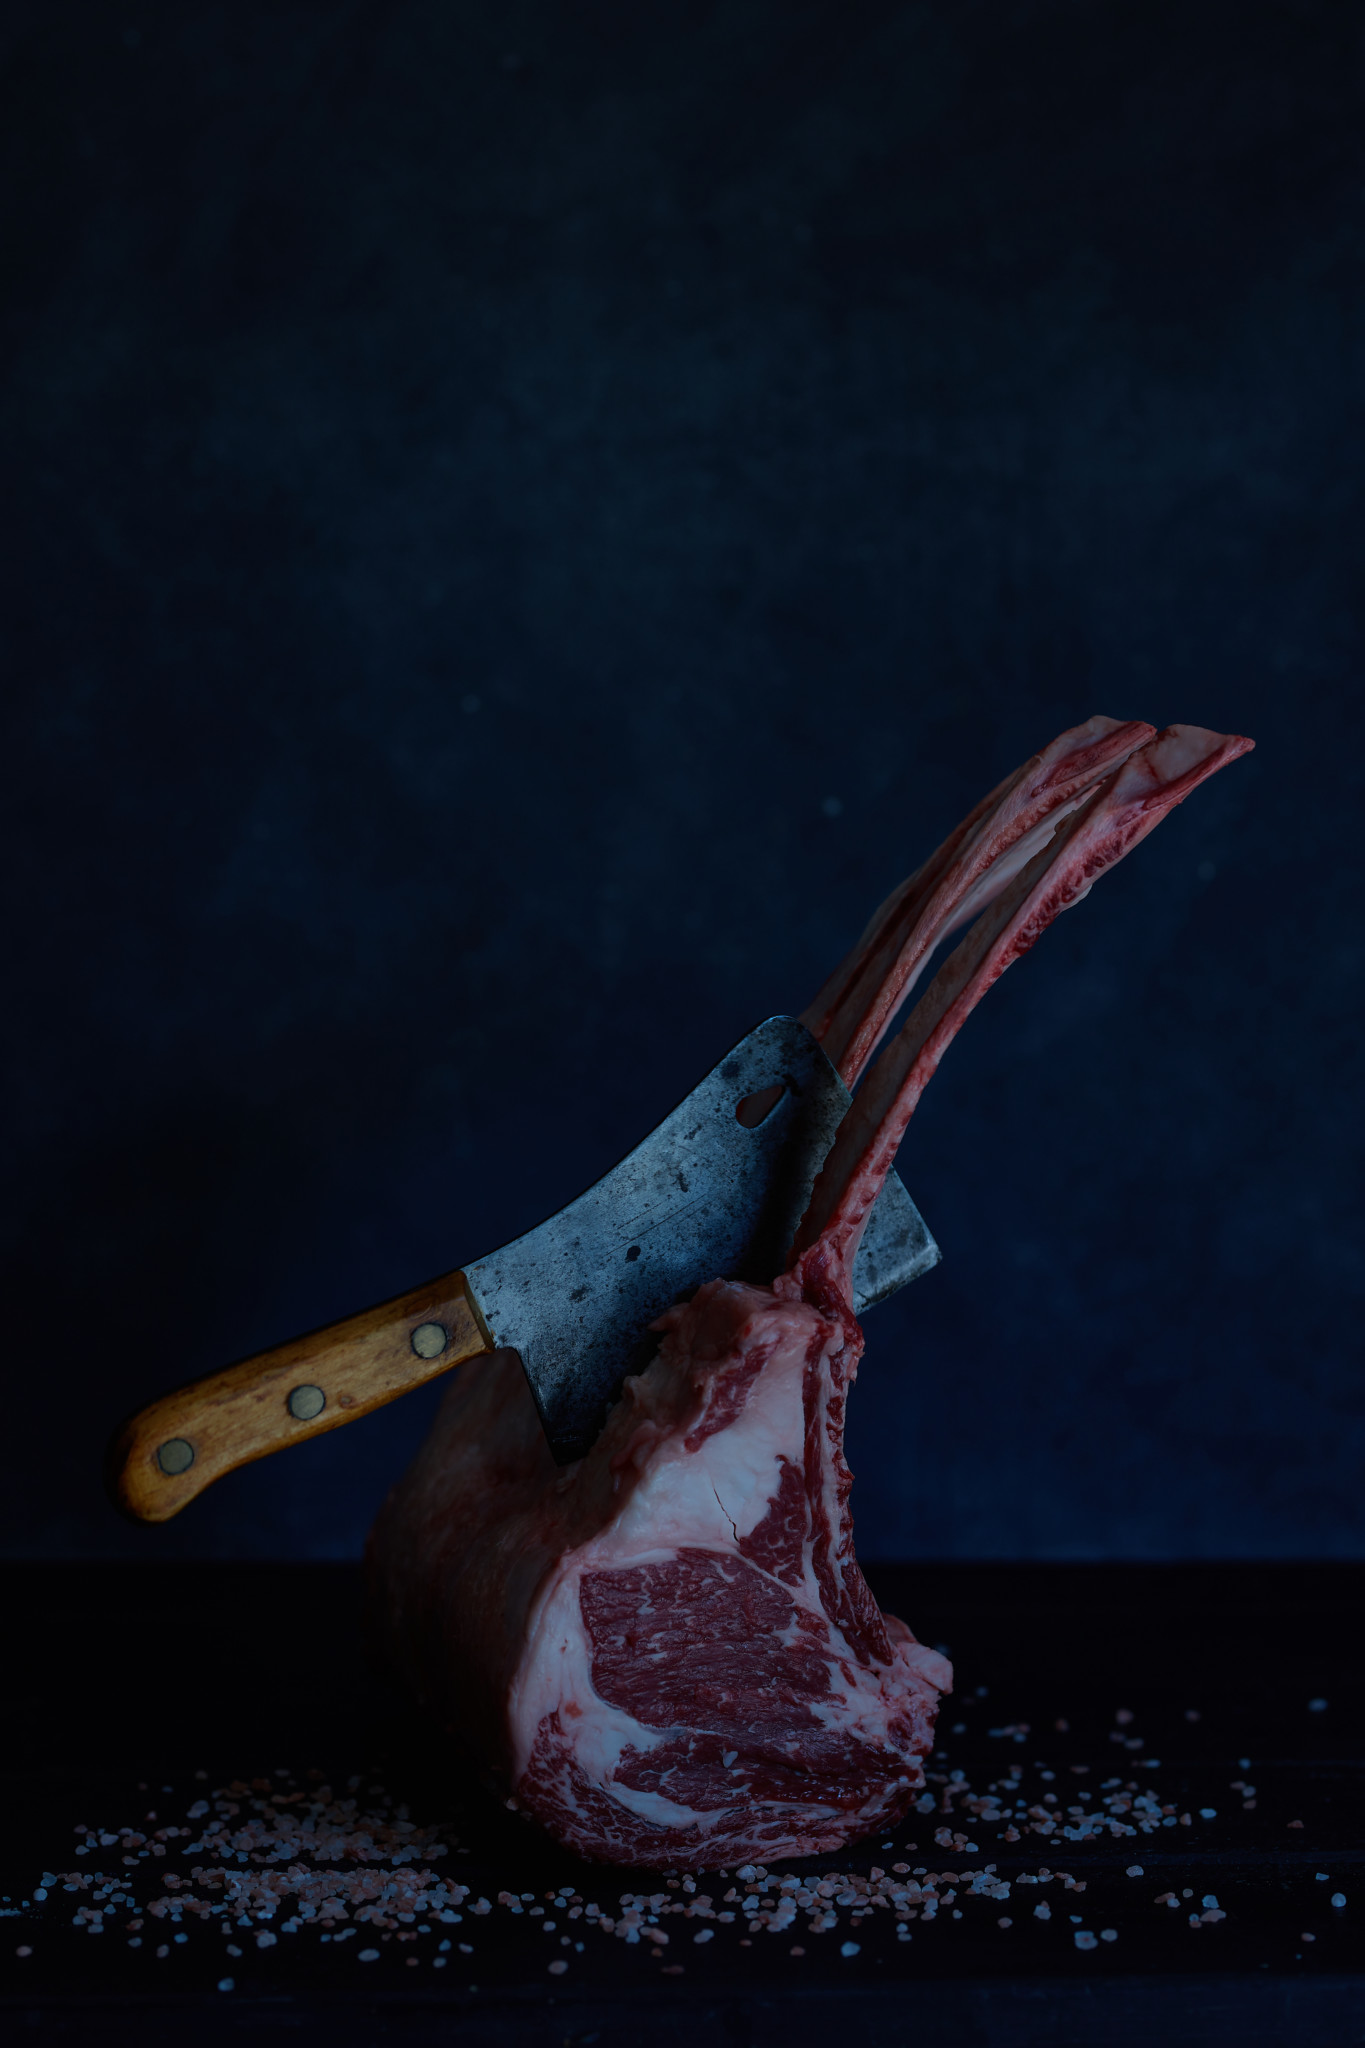 Large tomahawk steak with vintage knife stuck in ribs